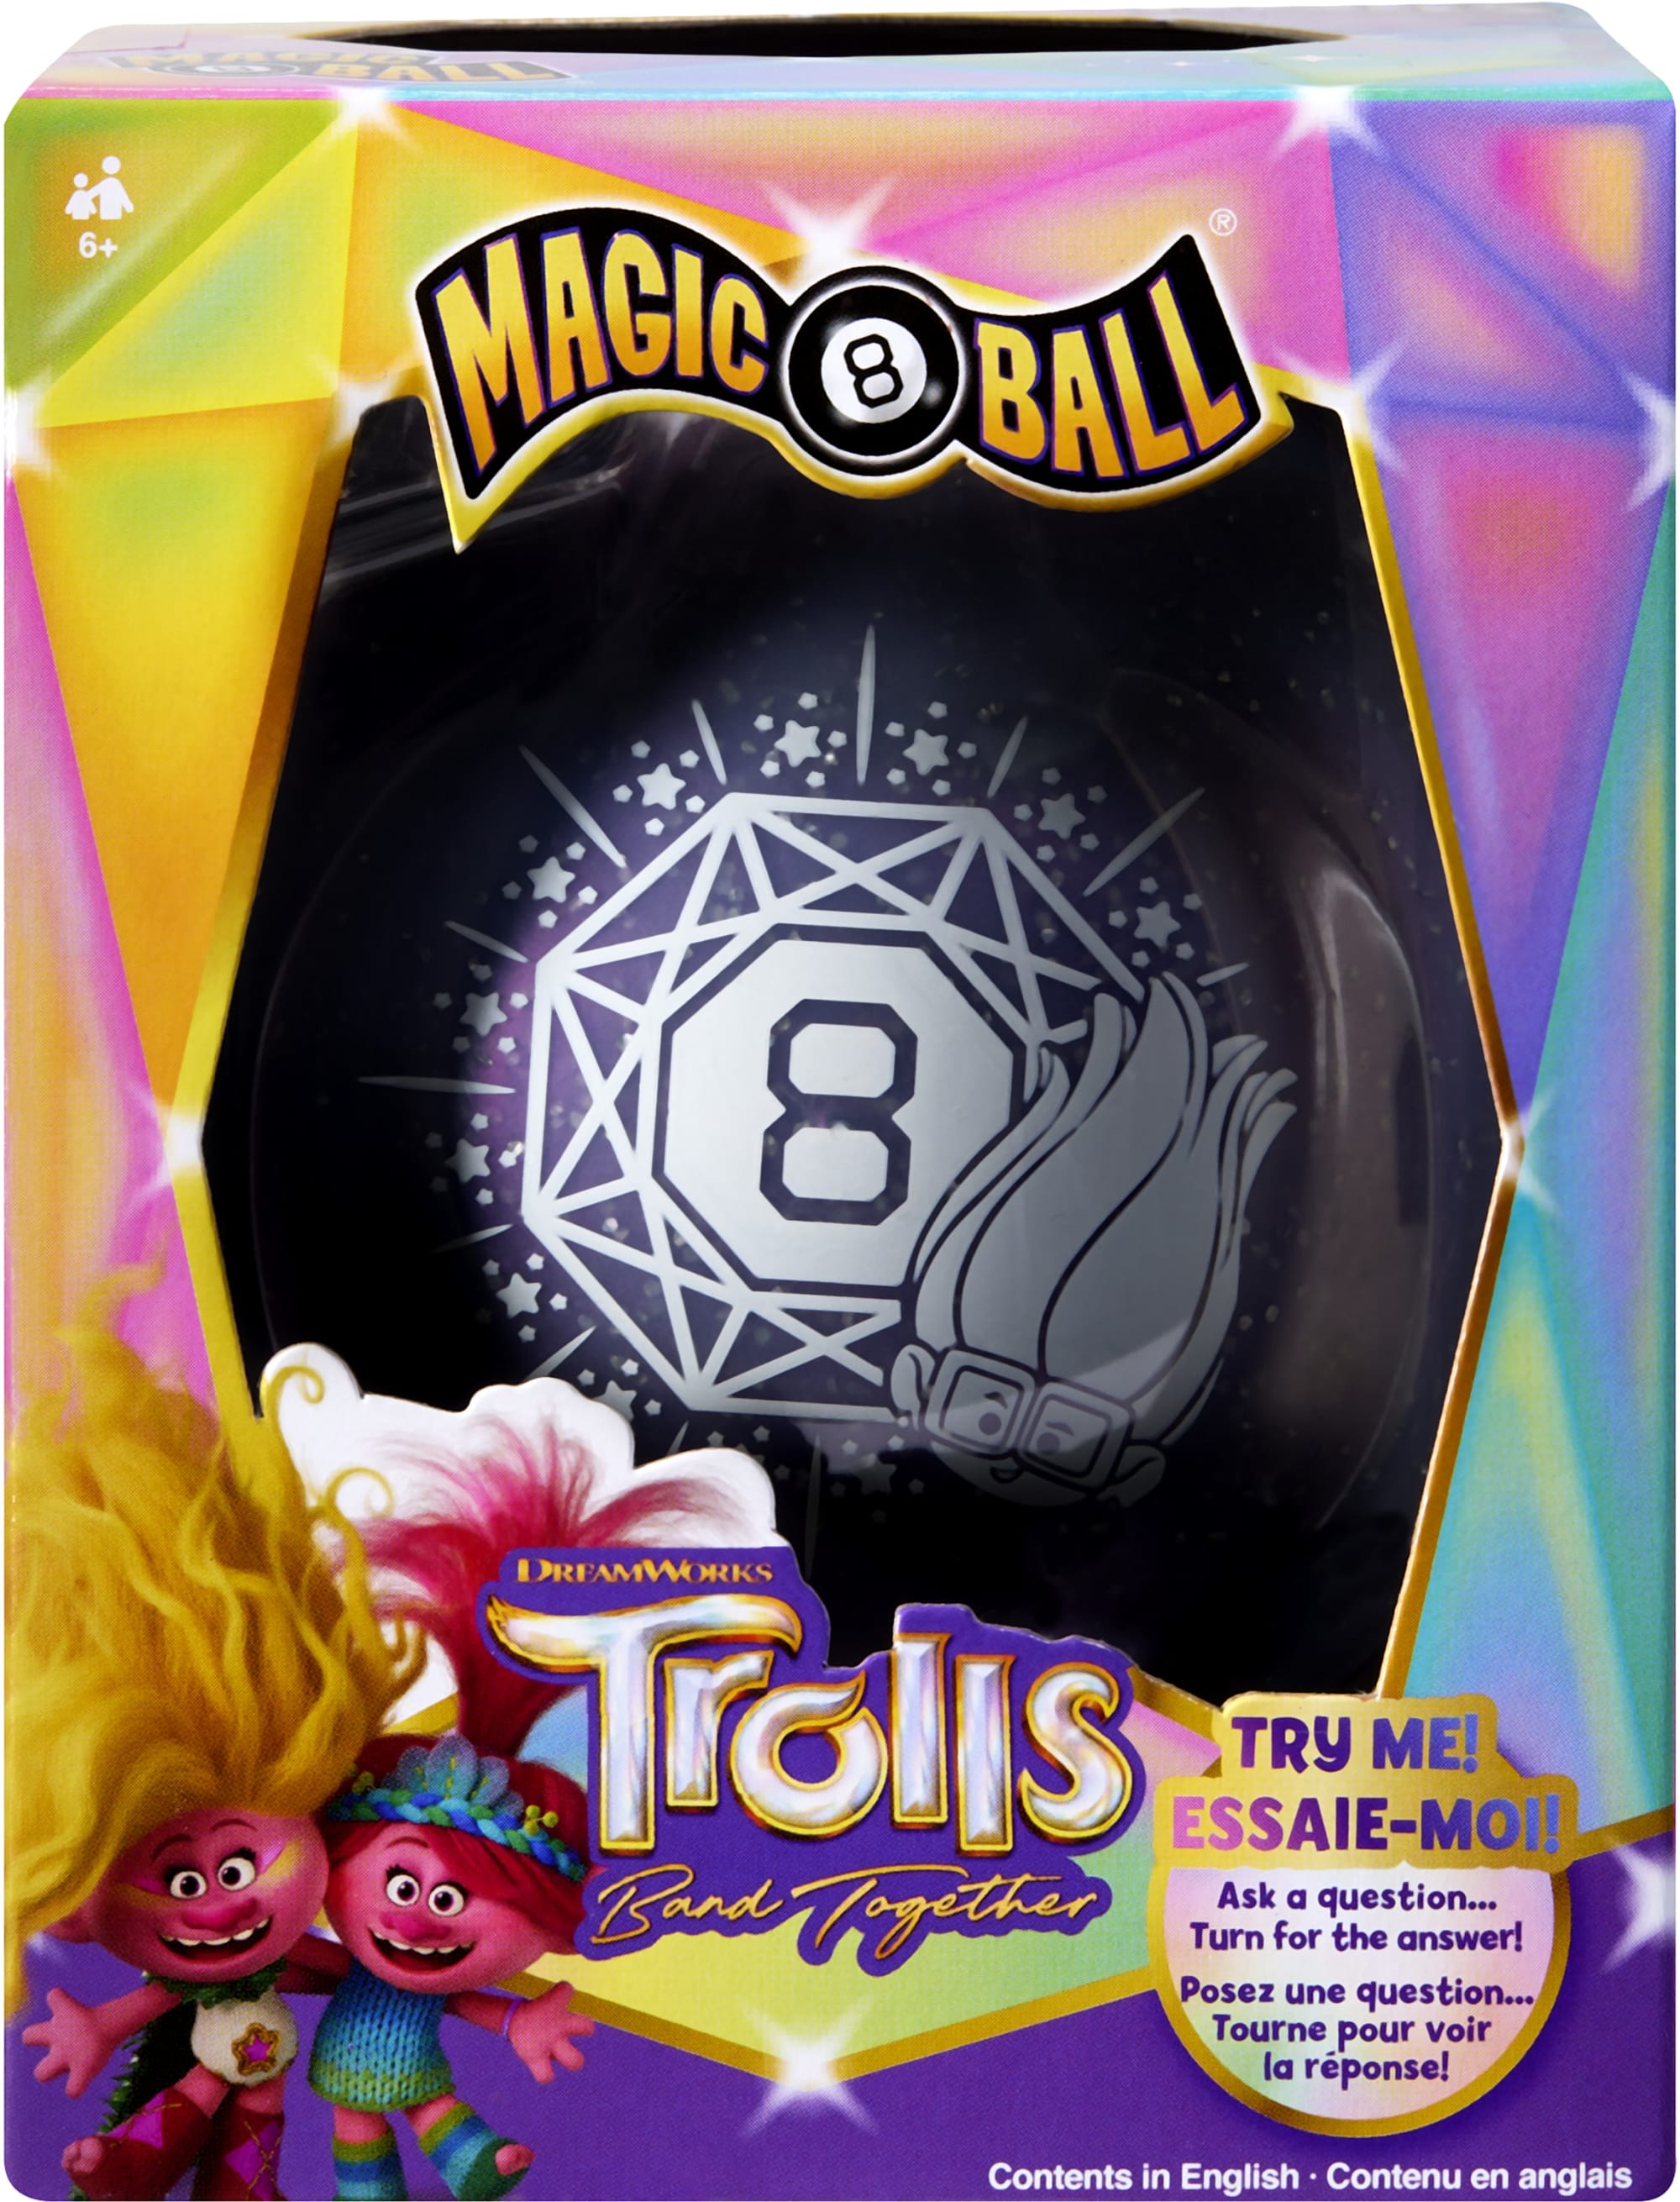 Magic 8 Ball Kids Toy, Novelty Fortune Teller, Ask a Question & Turn Over  for Answer